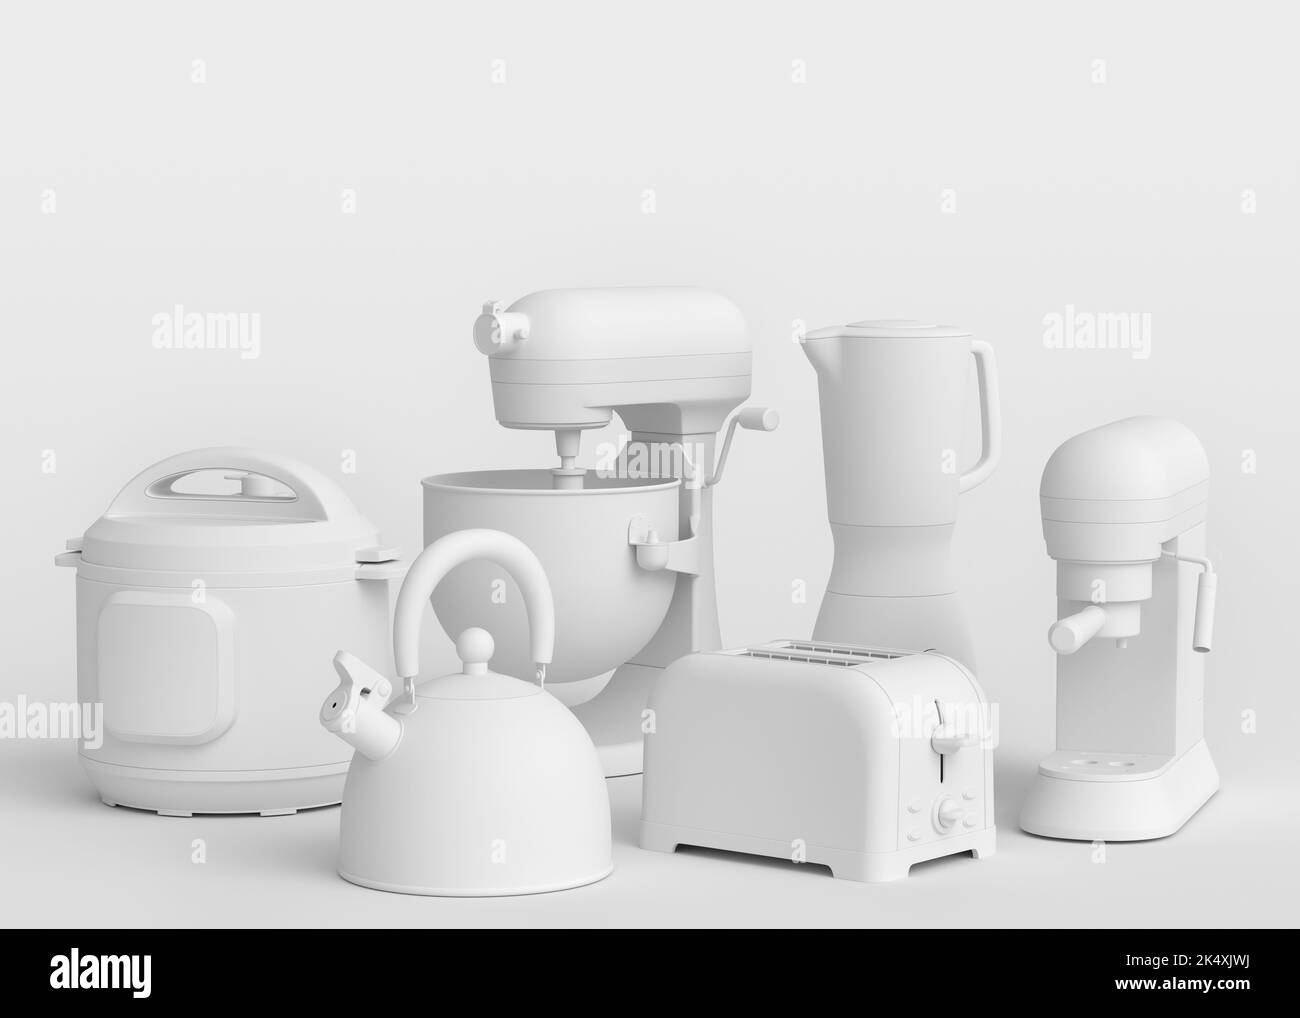 Electric kitchen appliances and utensils for making breakfast on monochrome background. 3d render of kitchenware for cooking, baking, blending and whi Stock Photo